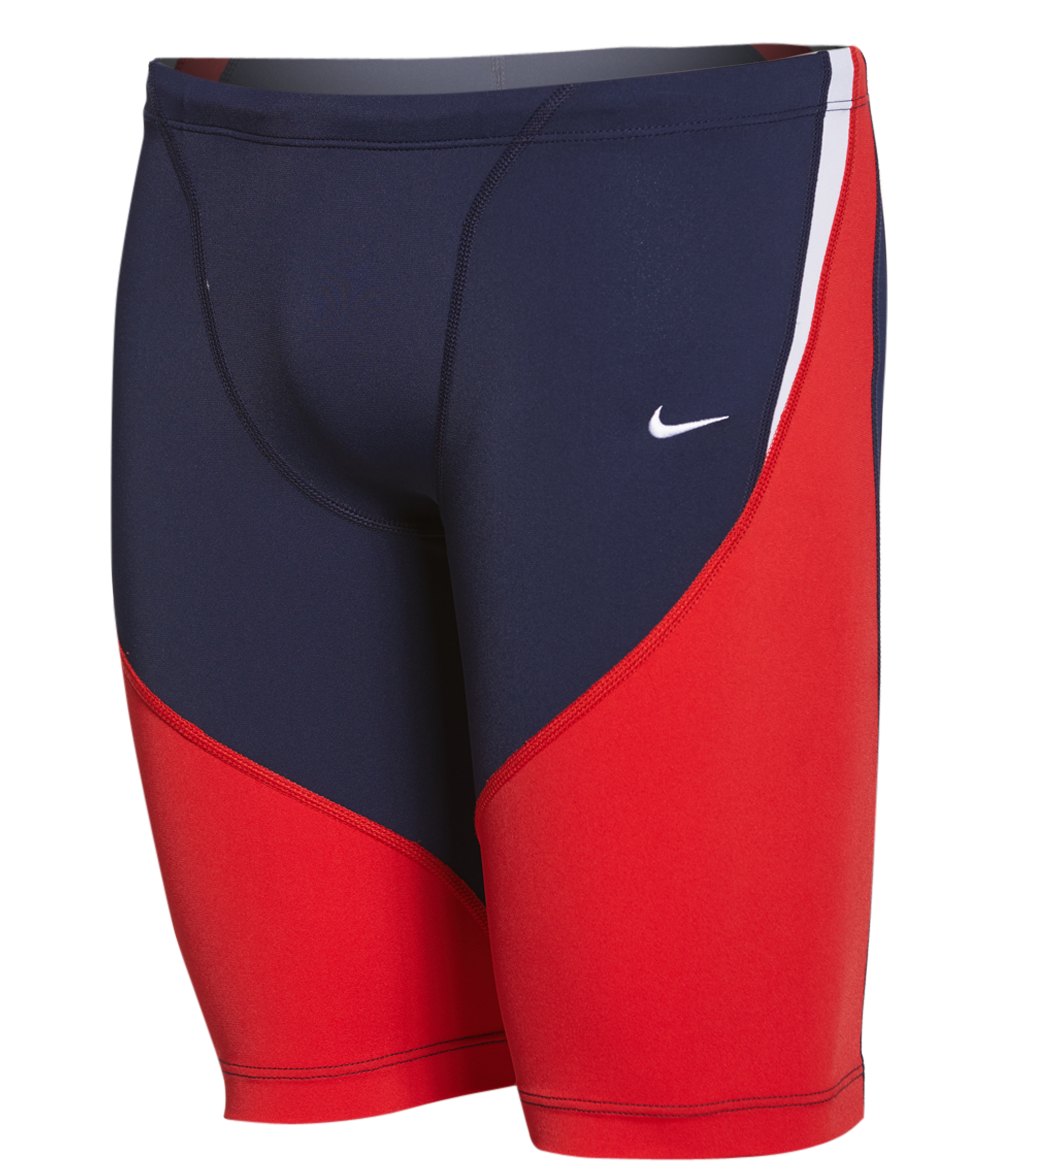 Nike Men's Color Surge Swimsuit Jammer - Red/Navy 28 Polyester/Pbt - Swimoutlet.com